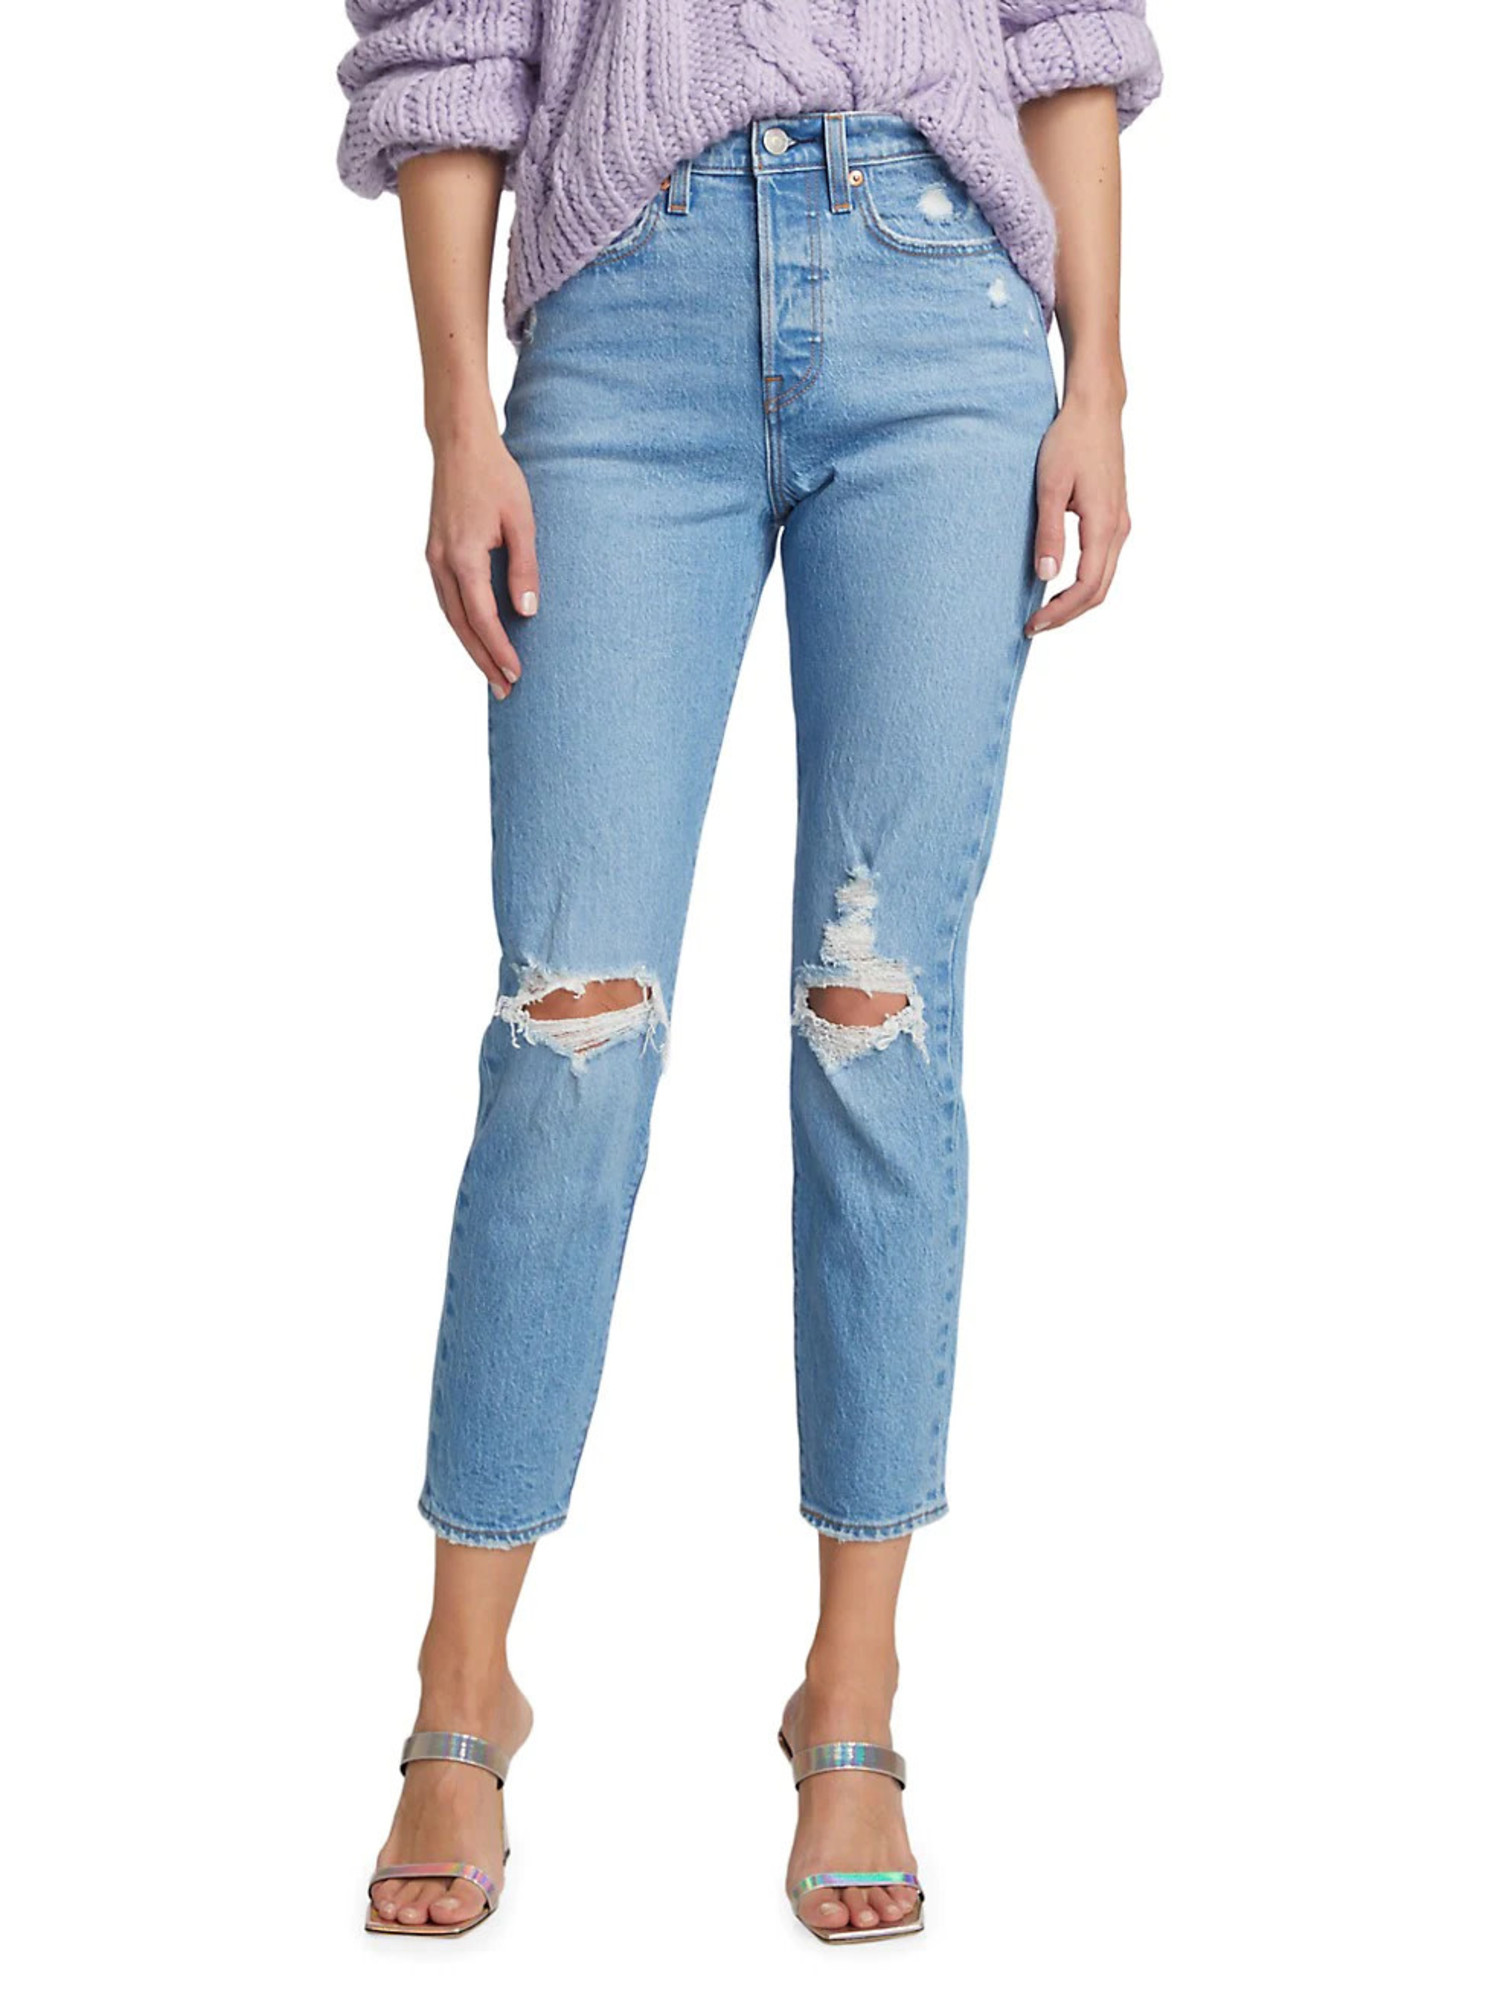 How to Wear Wedgie Jeans - Test Driving Levi's Wedgie Jeans